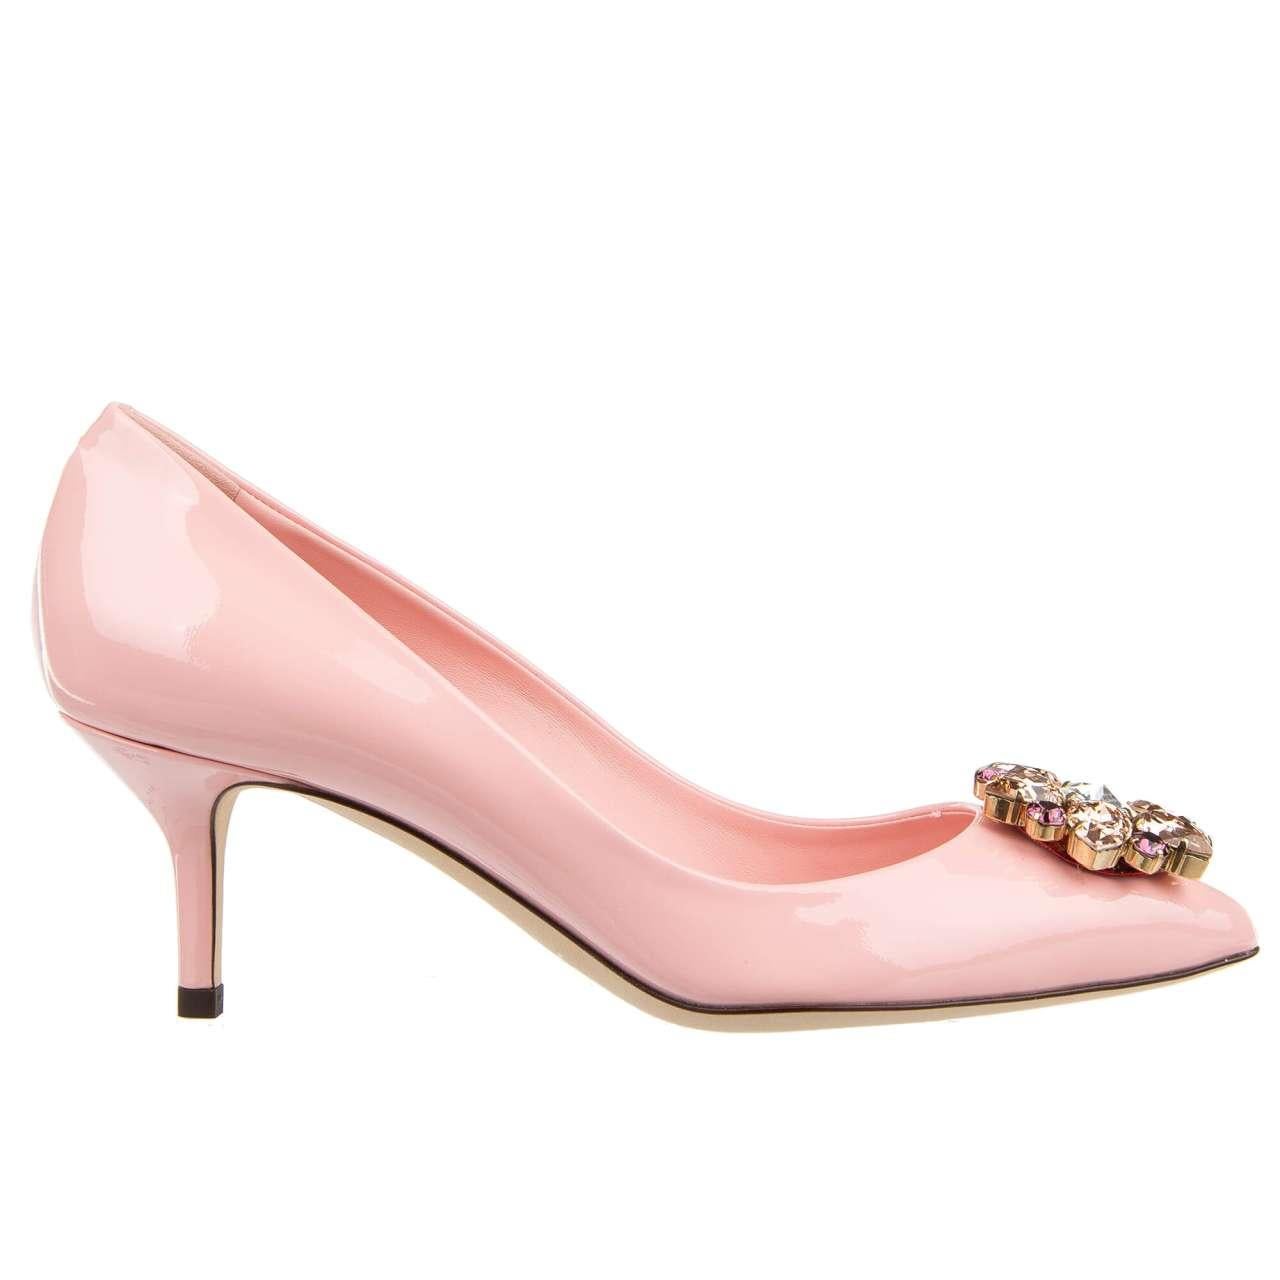 - Pointed patent leather Pumps BELLUCCI with crystals brooch in pink, rose and purple by DOLCE & GABBANA - New with Box - MADE IN ITALY - Former RRP: EUR 725 - Crystals brooch in front - Model: CD0693-B1471-8M305 - Material: 100% Calfskin - Inner